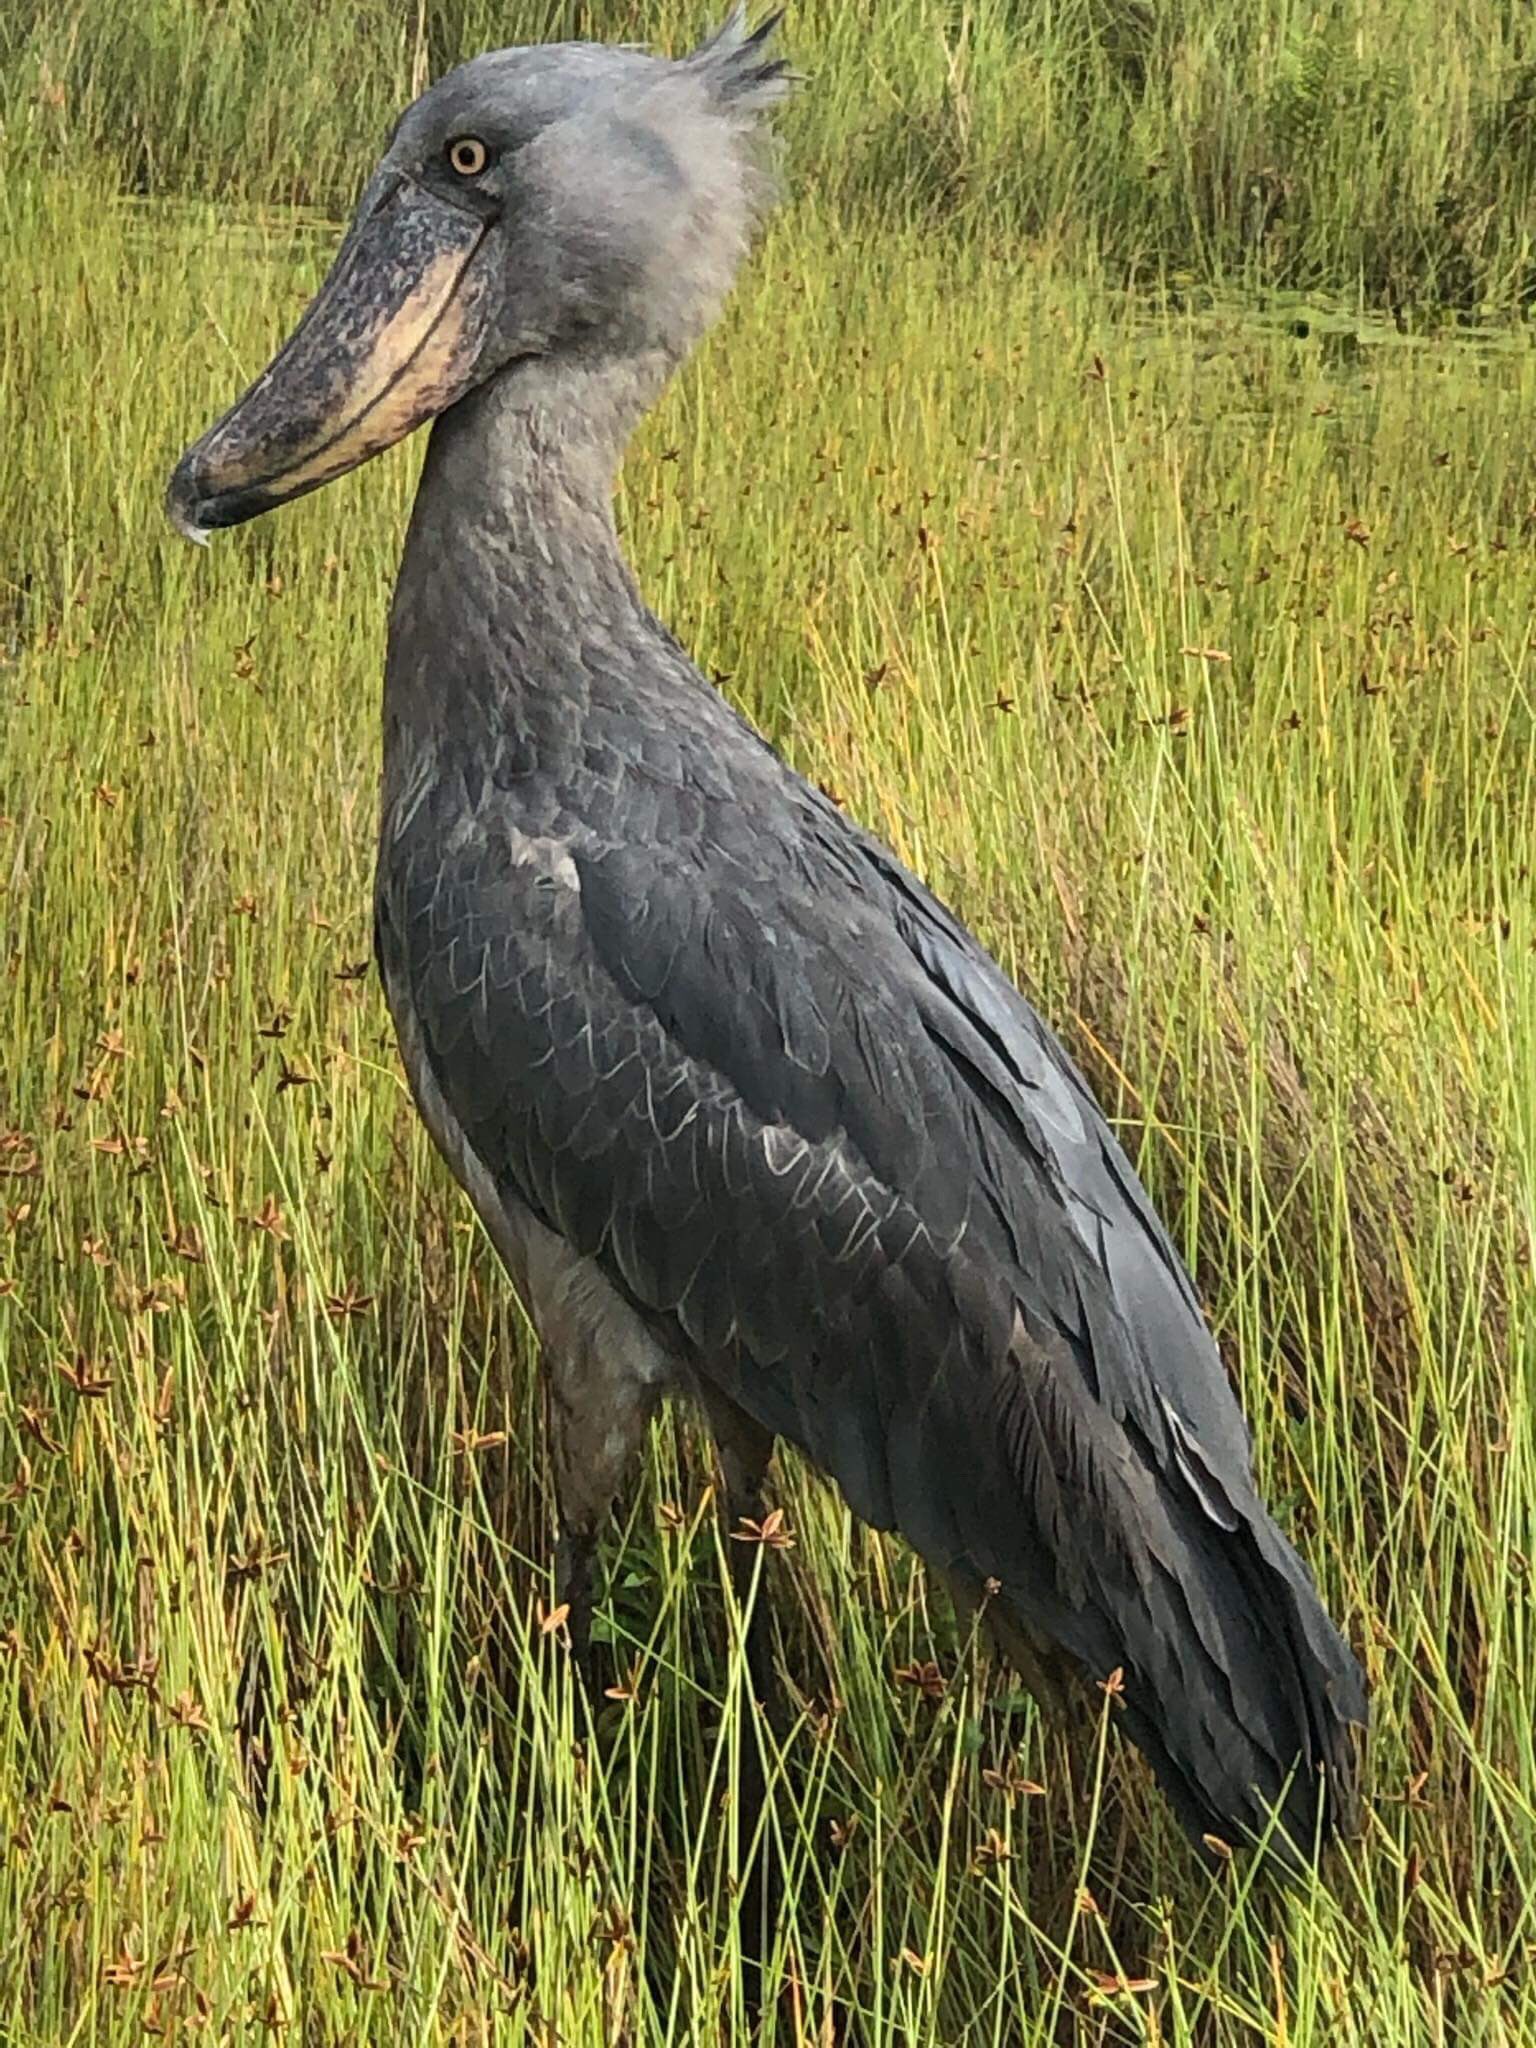 You could say this Shoebill was quite confiding on the @zootherabirding #Uganda tour this week. Photo taken by our guide Paul Tamwenya on his iPhone!! https://t.co/8nS4pJgnml